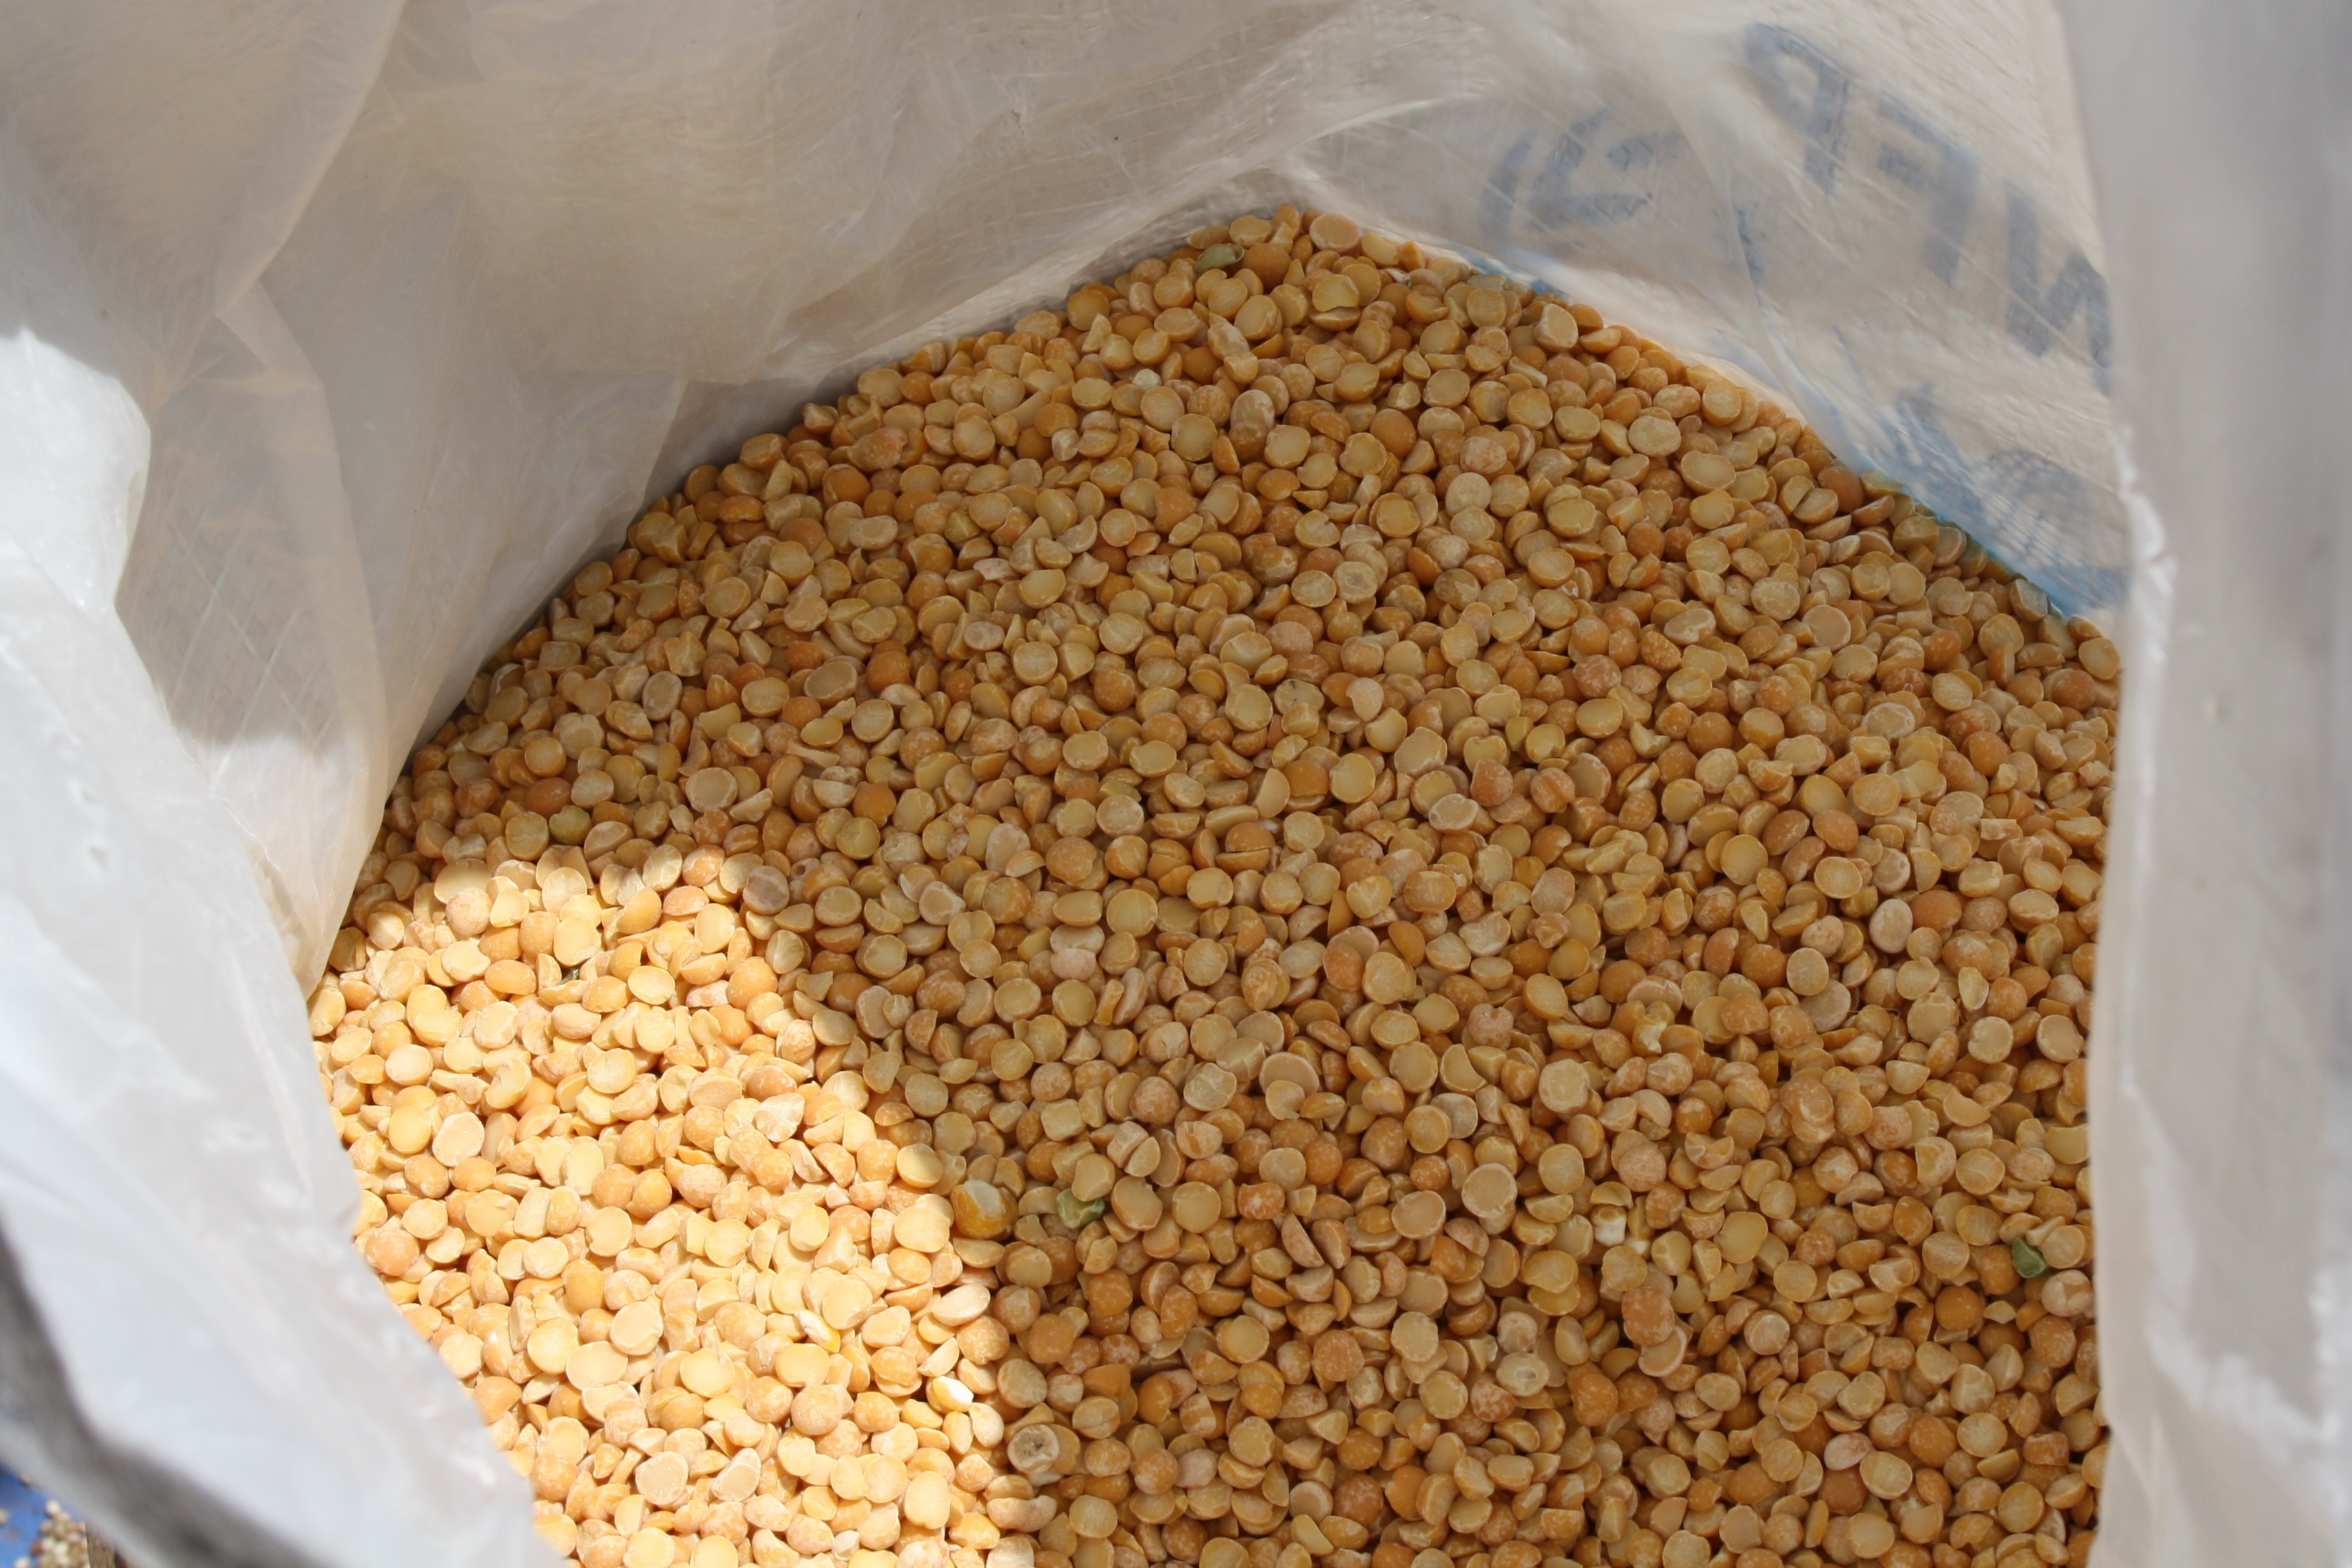 A sack of split peas awaits distribution at a joint WFP ACTED site in central Bamako, Mali (8511068596)